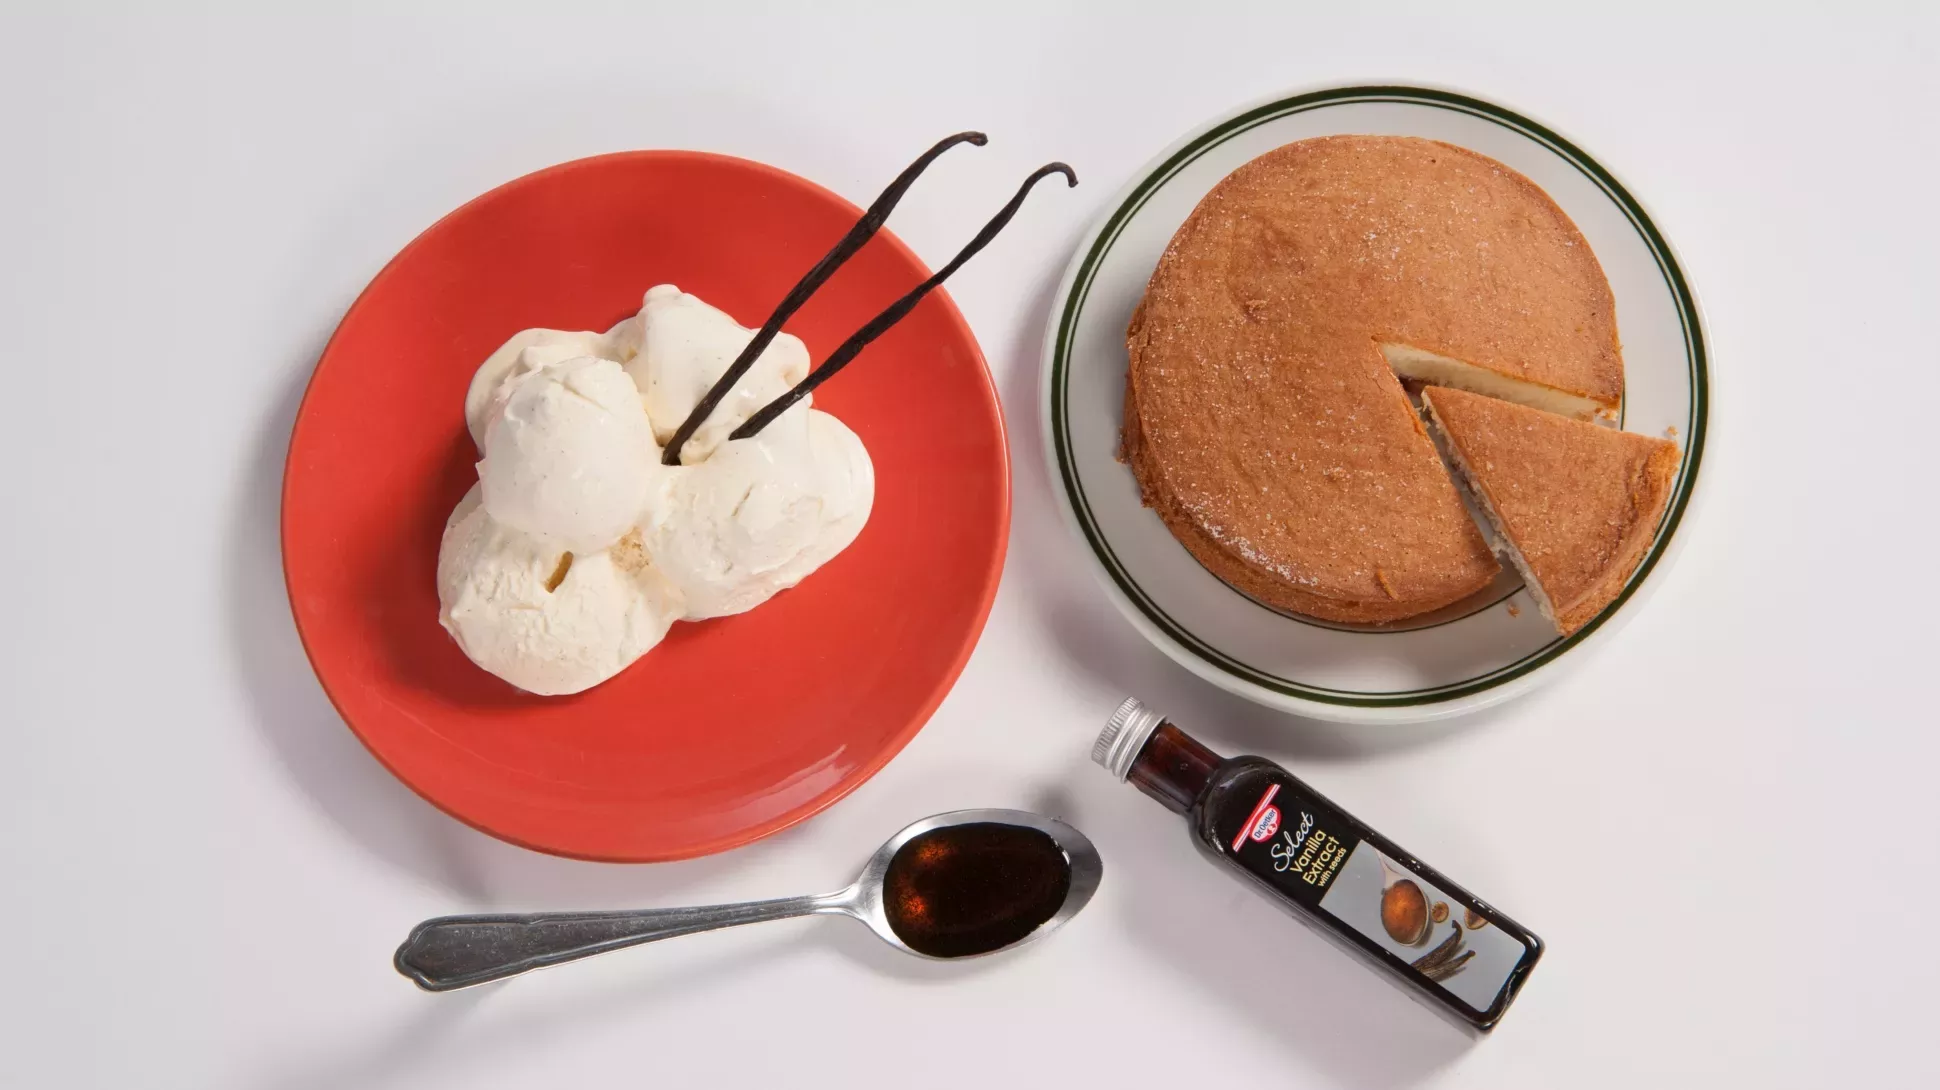 Some ice cream, a cake and a bottle of vanilla extract